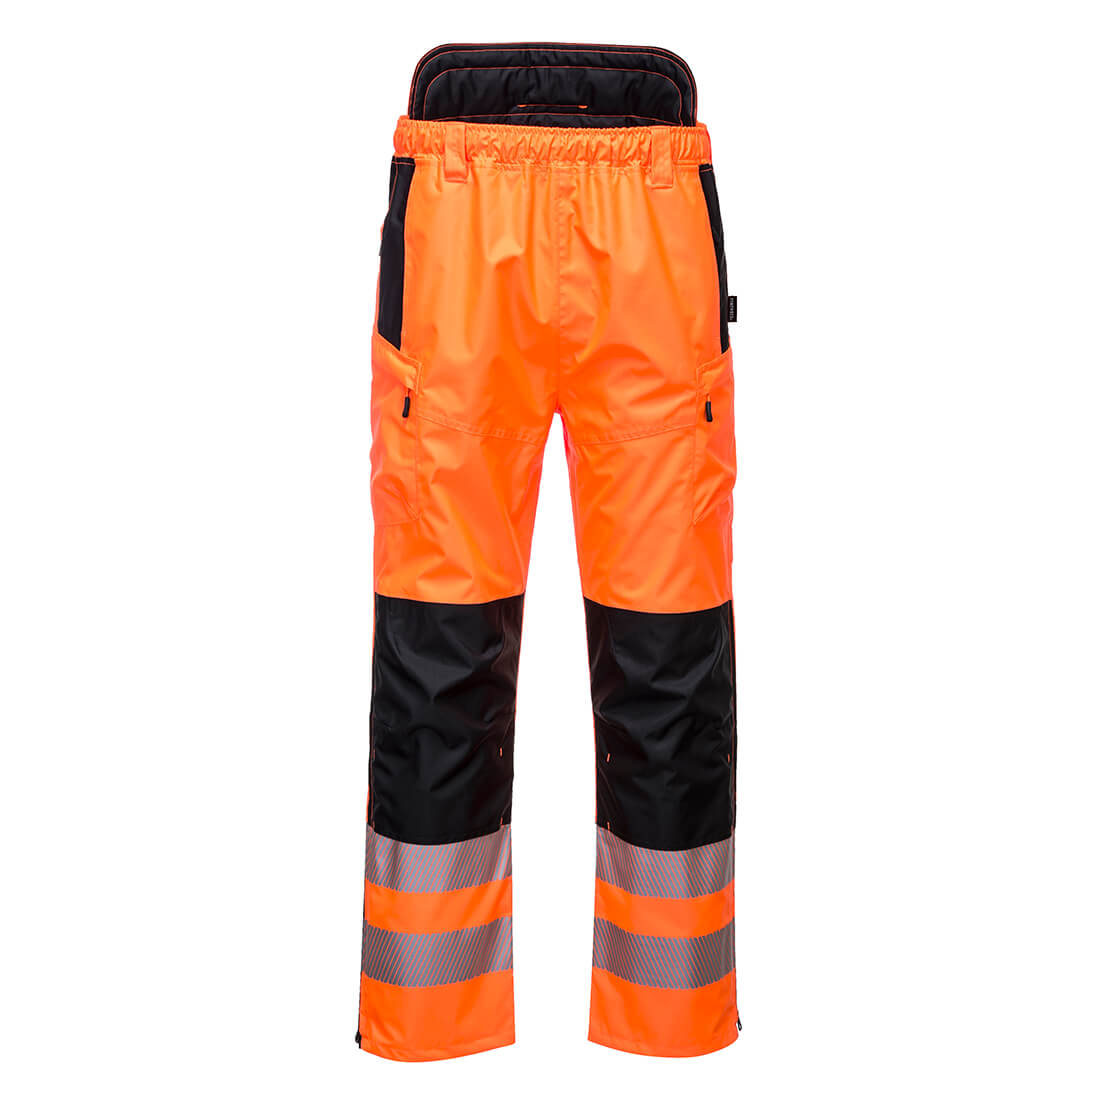 Hi-Vis Waterproof and Extremely Breathable Trousers with 300D Stretch Oxford